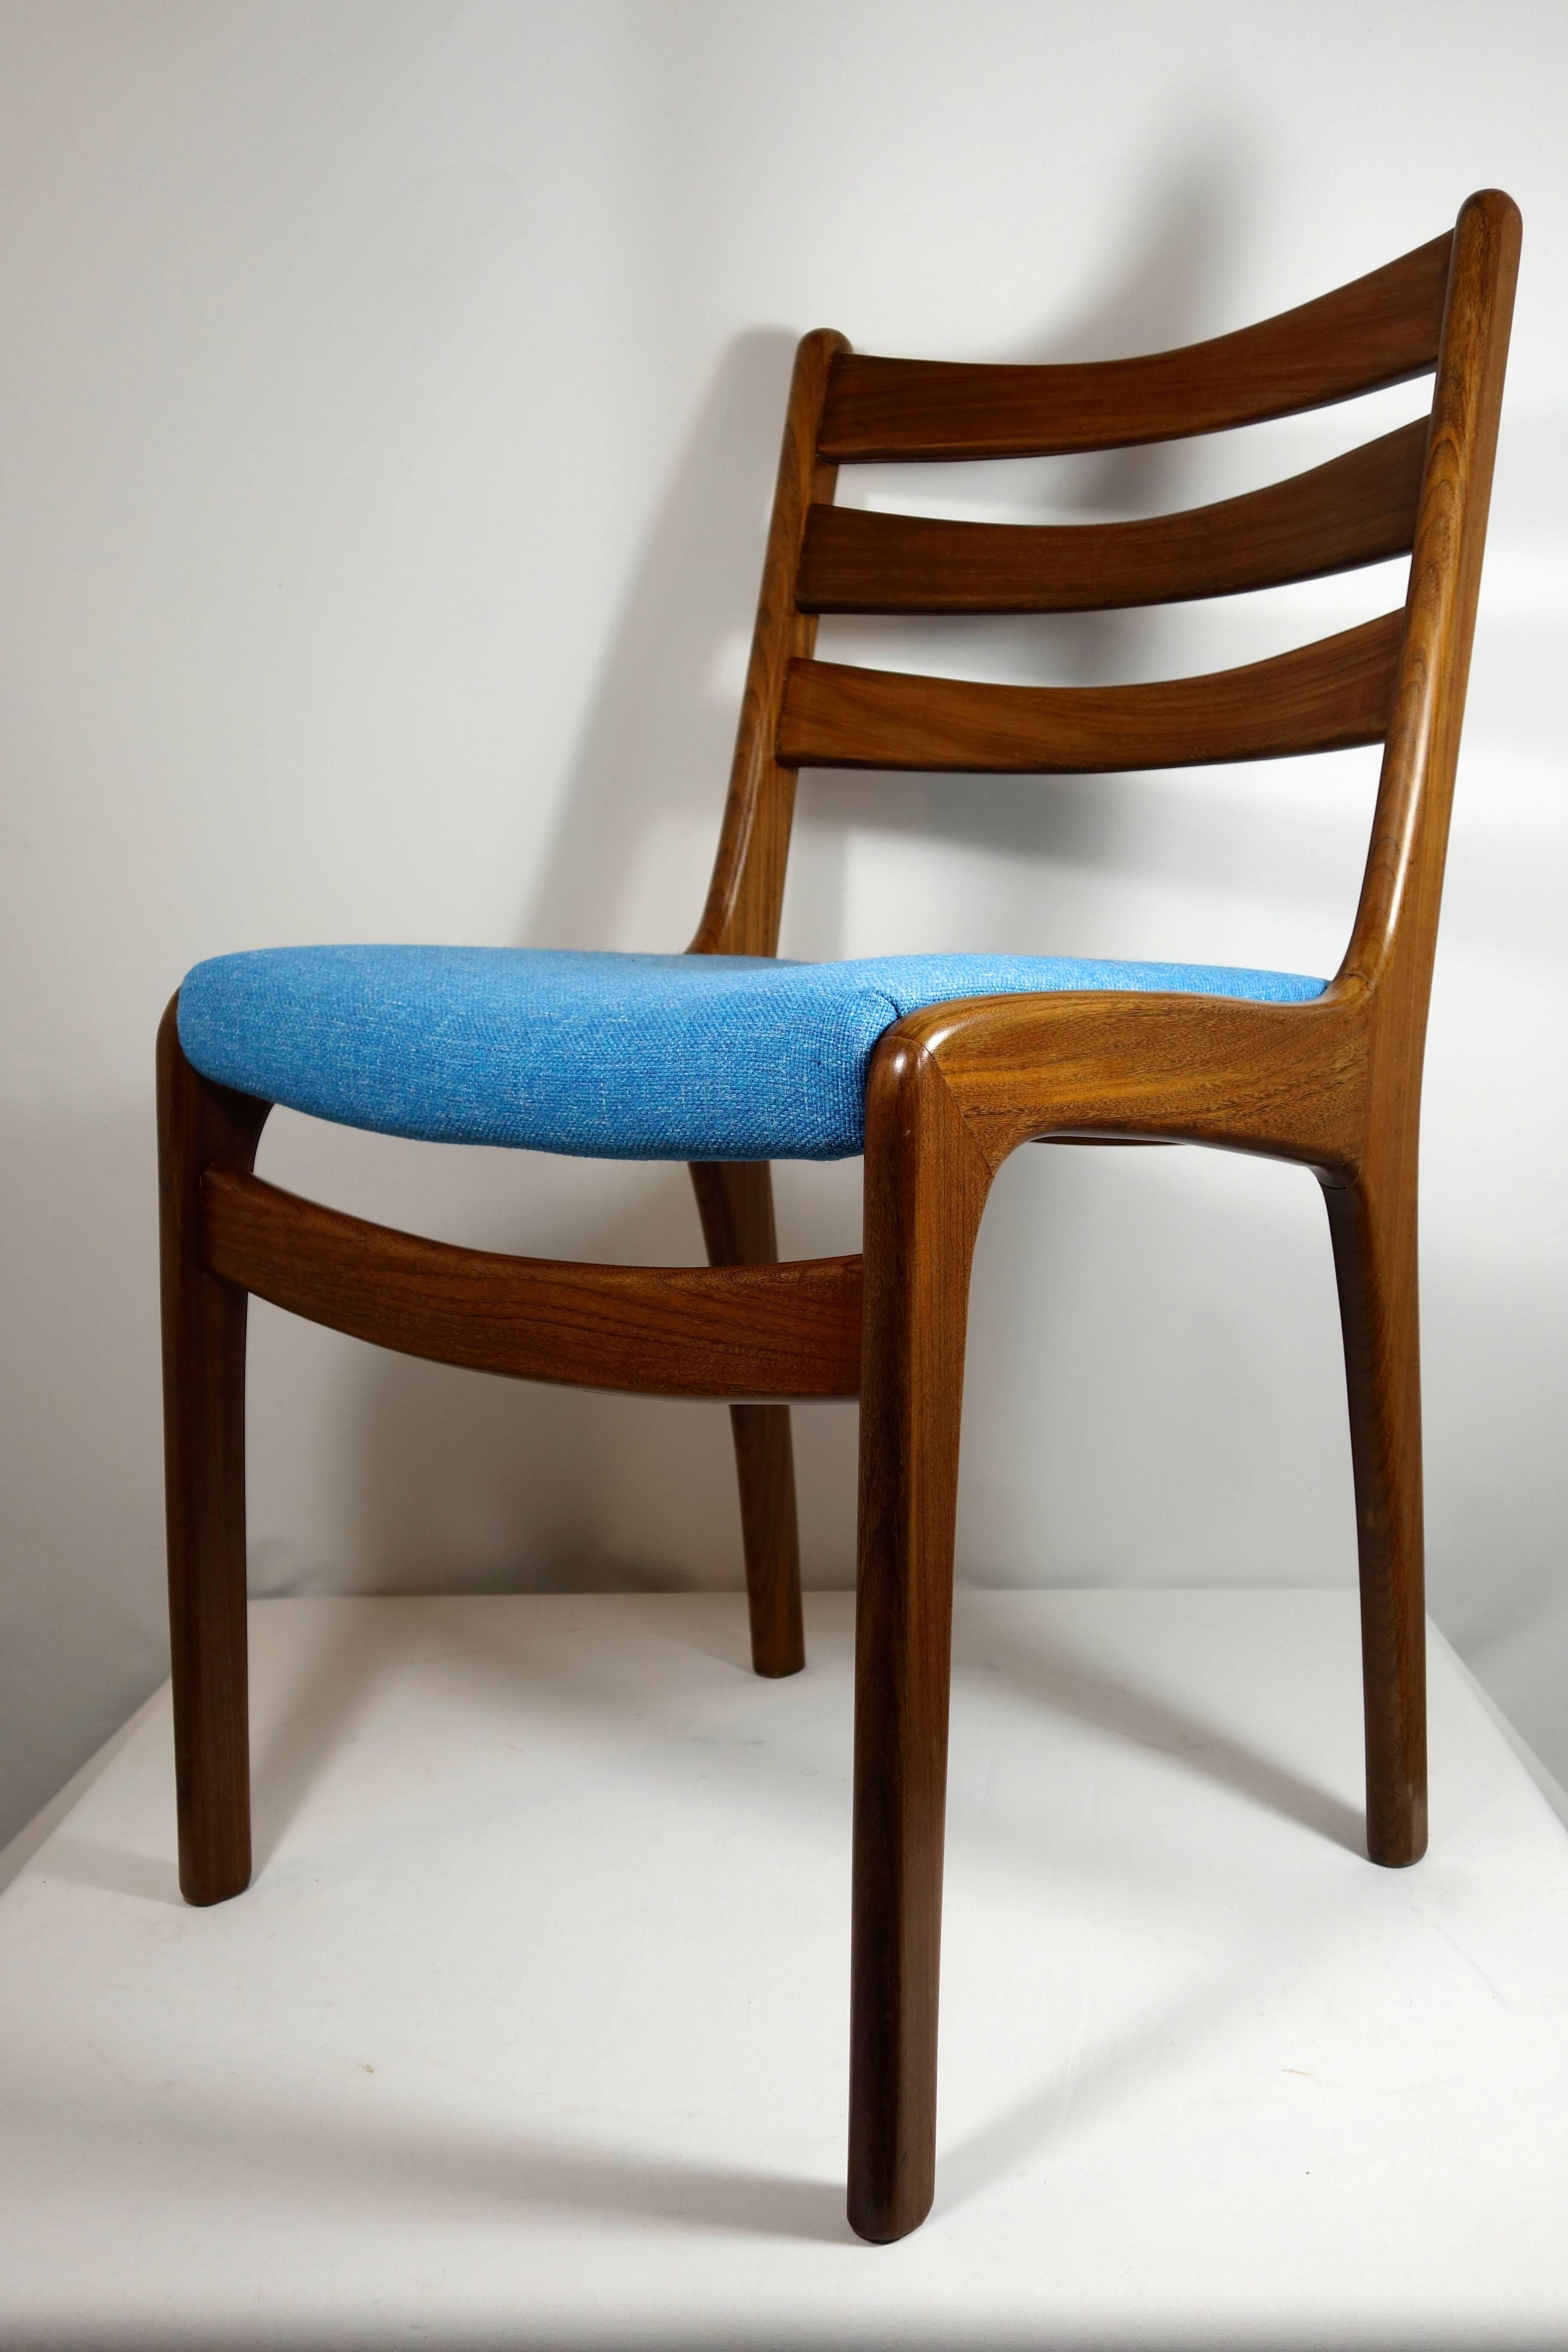 These elegant midcentury dining chairs from Scandinavia are made of teak wood, They have been reupholstered with a refined but strong blue fabric.